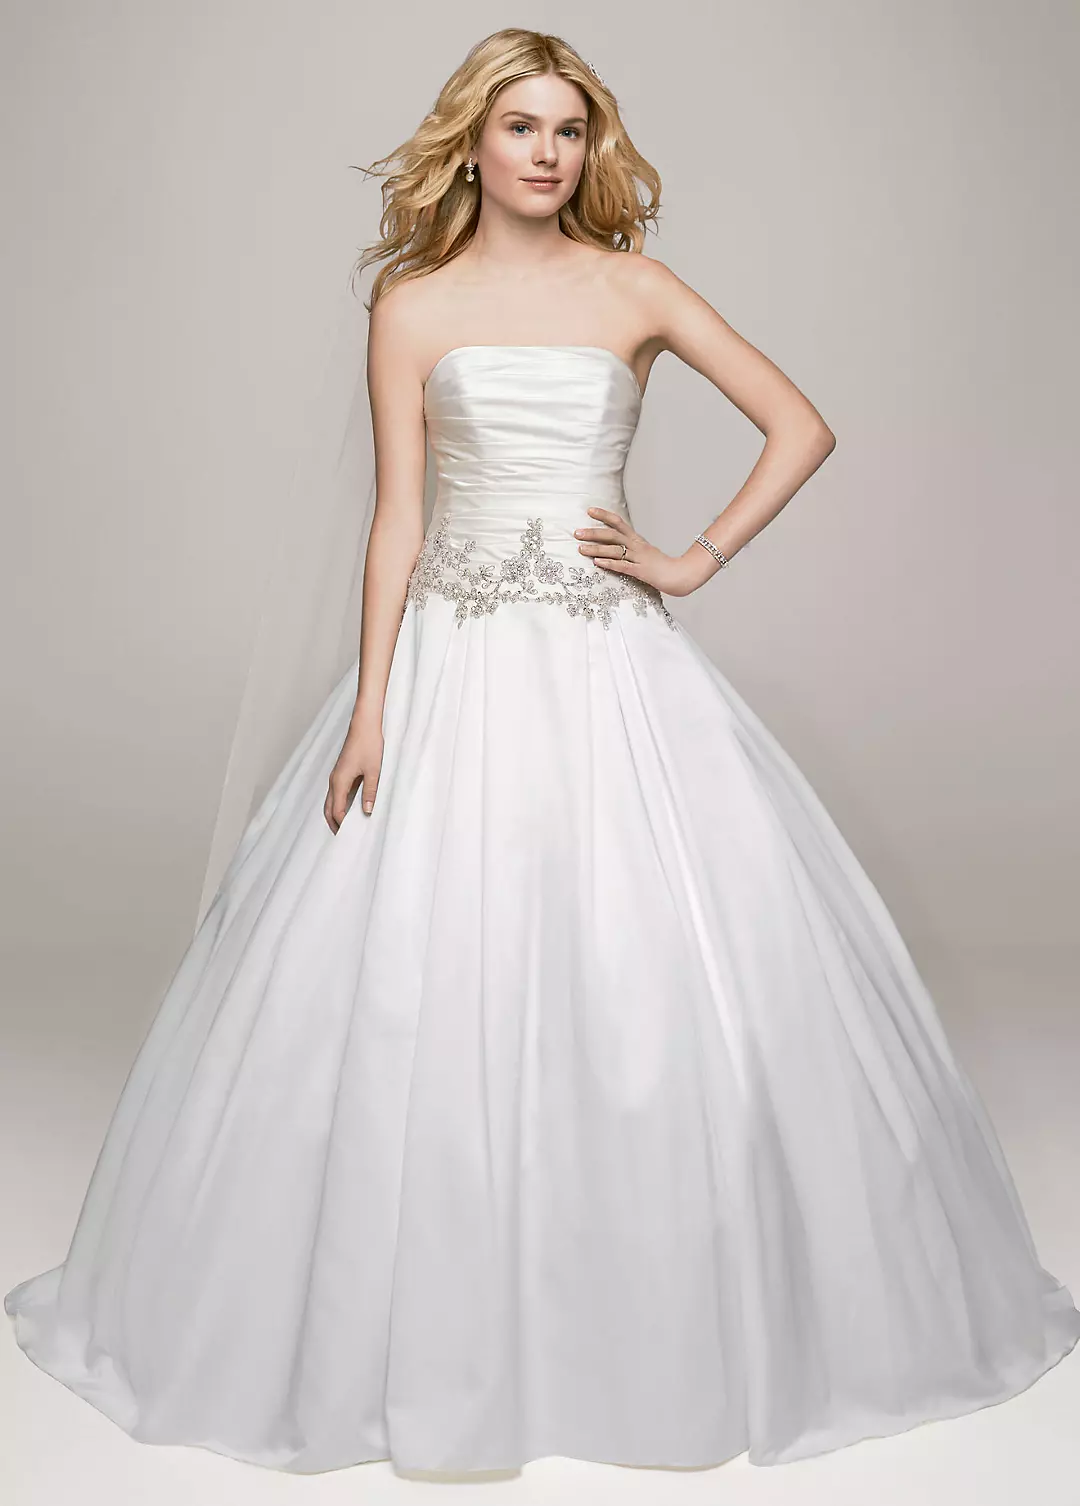 Strapless Satin Wedding Dress with Beaded Accents Image